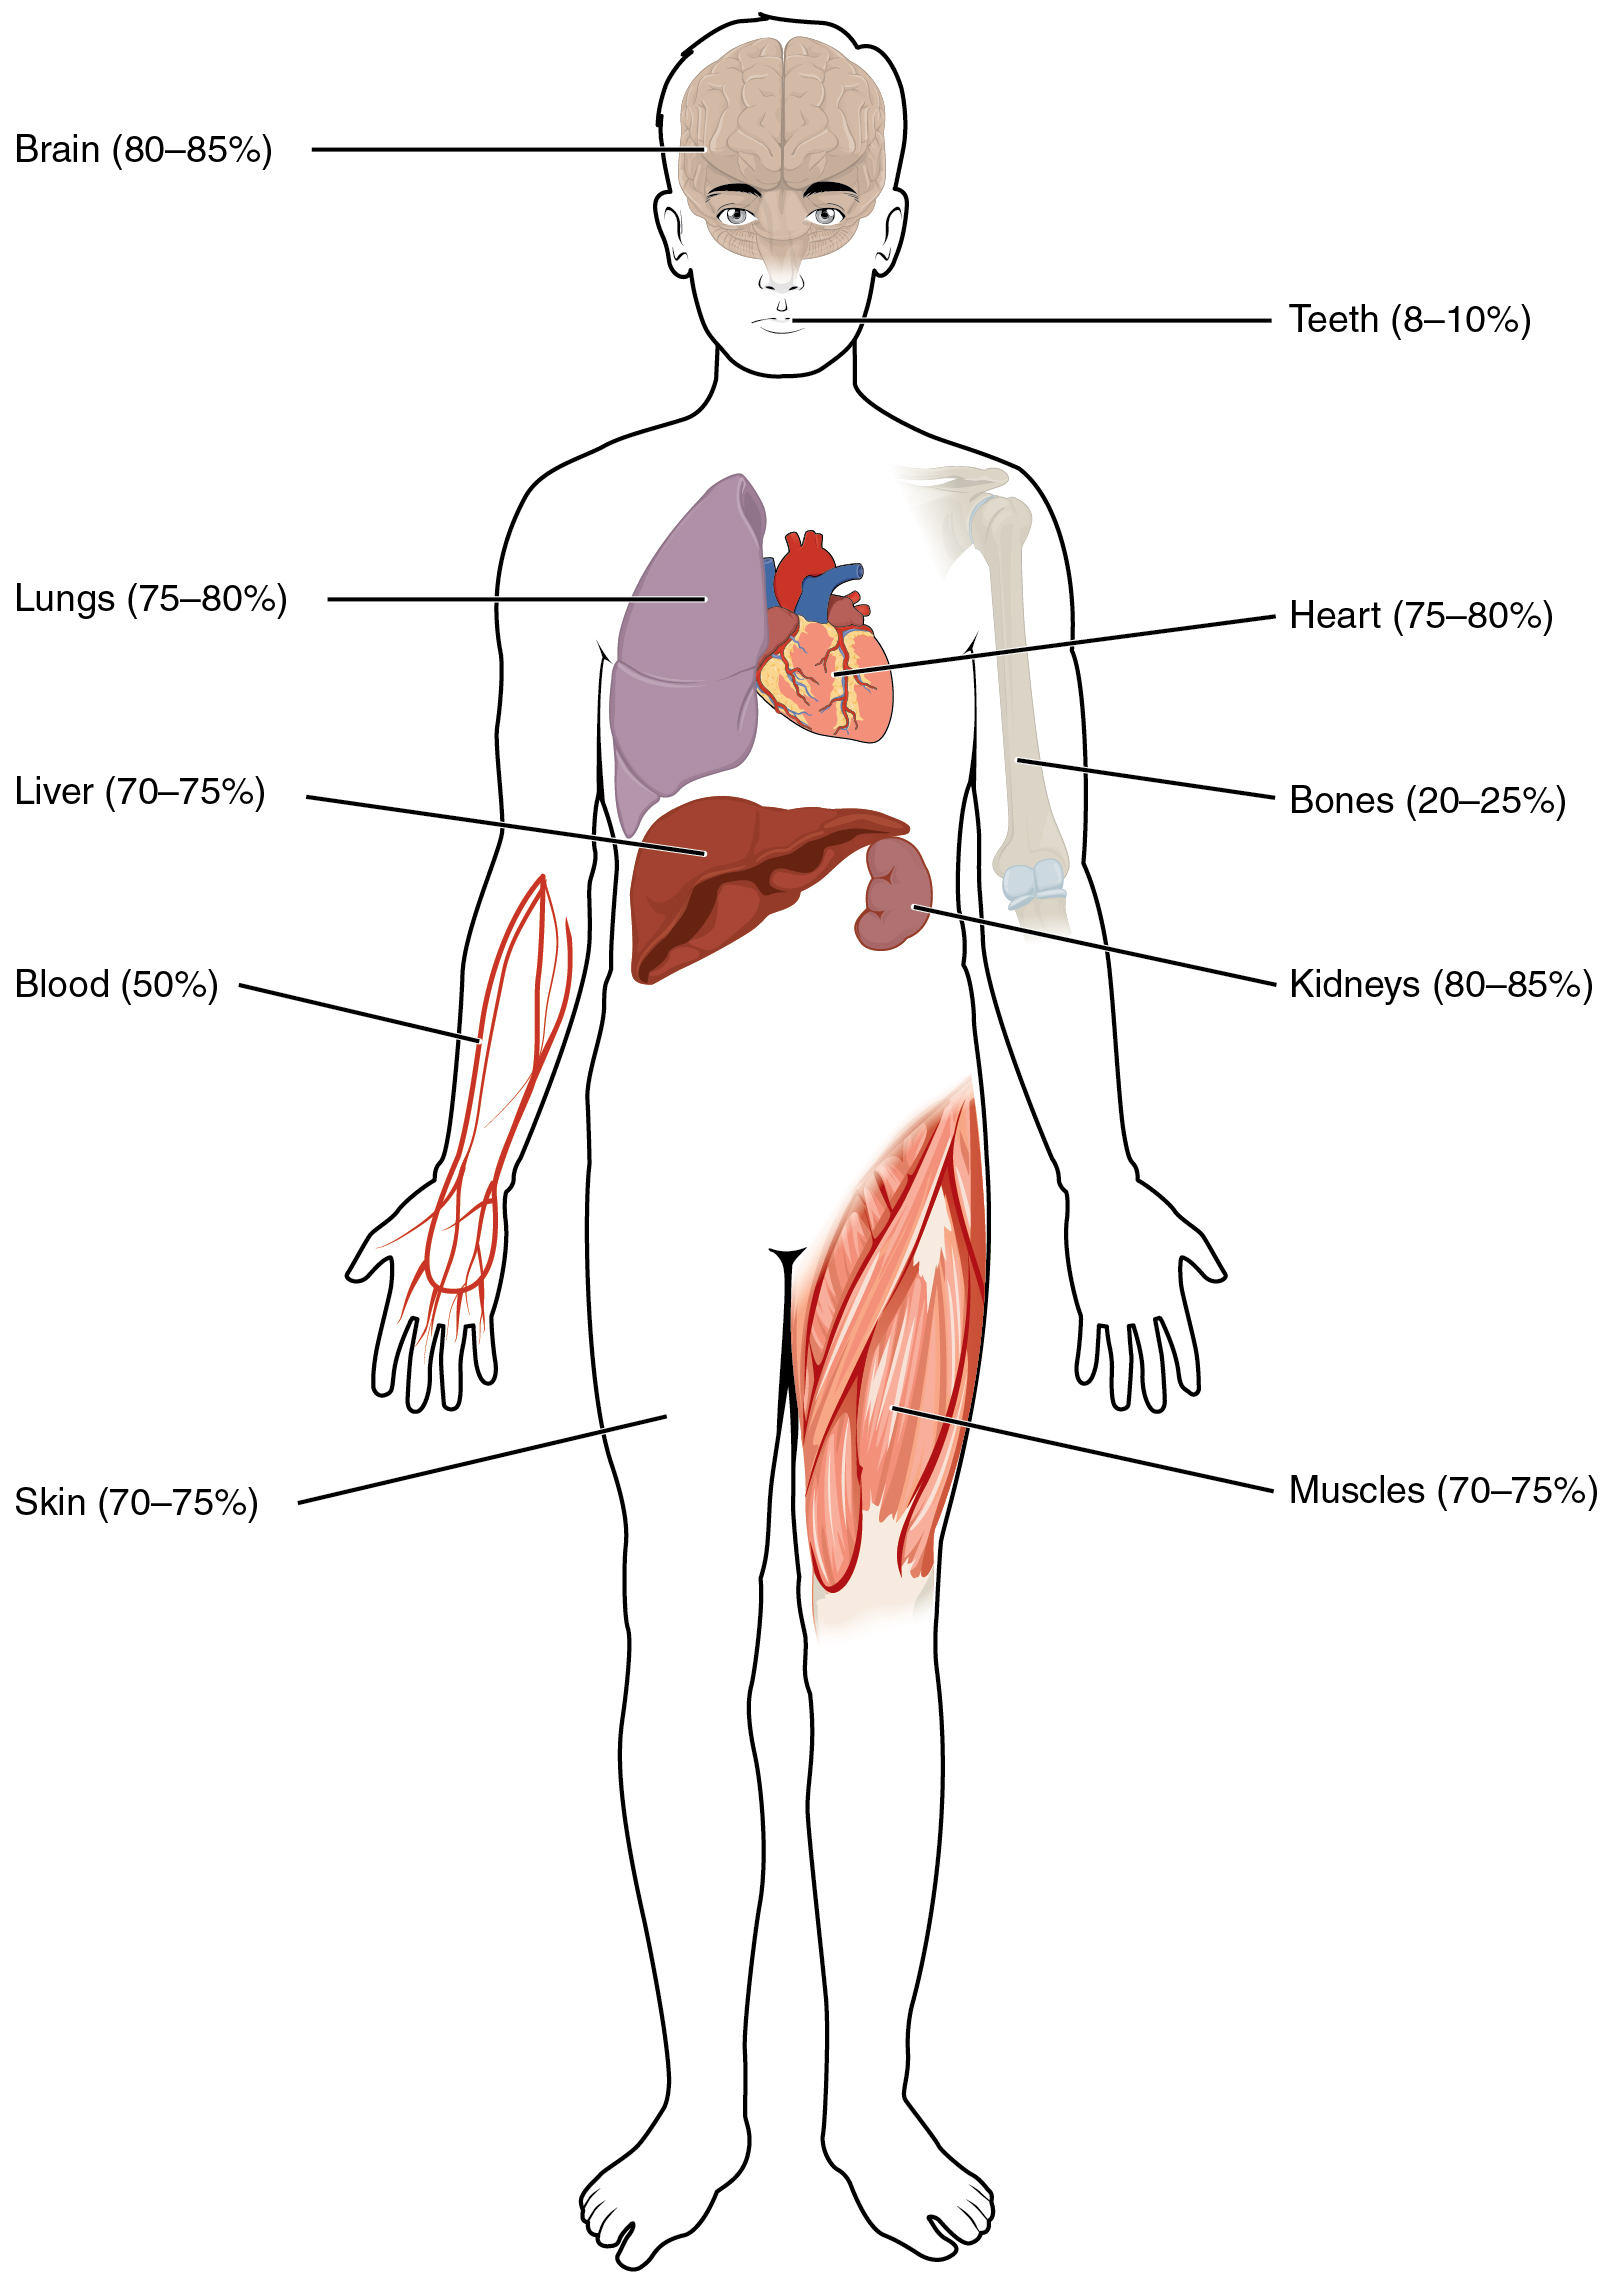 This illustration shows a silhouette of a human body with various organs highlighted. The percent of water contained in each organ is given. The brain typically contains 80% to 85% water, teeth contain 8% to 10% water, a single lung contains 75% to 80% water, the heart contains 75% to 80% water, the bones contain 20% to 25% water, the liver contains 70% to 75% water, the kidneys contain 80% to 85% water, the skin contains 70% to 75% water and the muscles also contain 70% to 75% water.